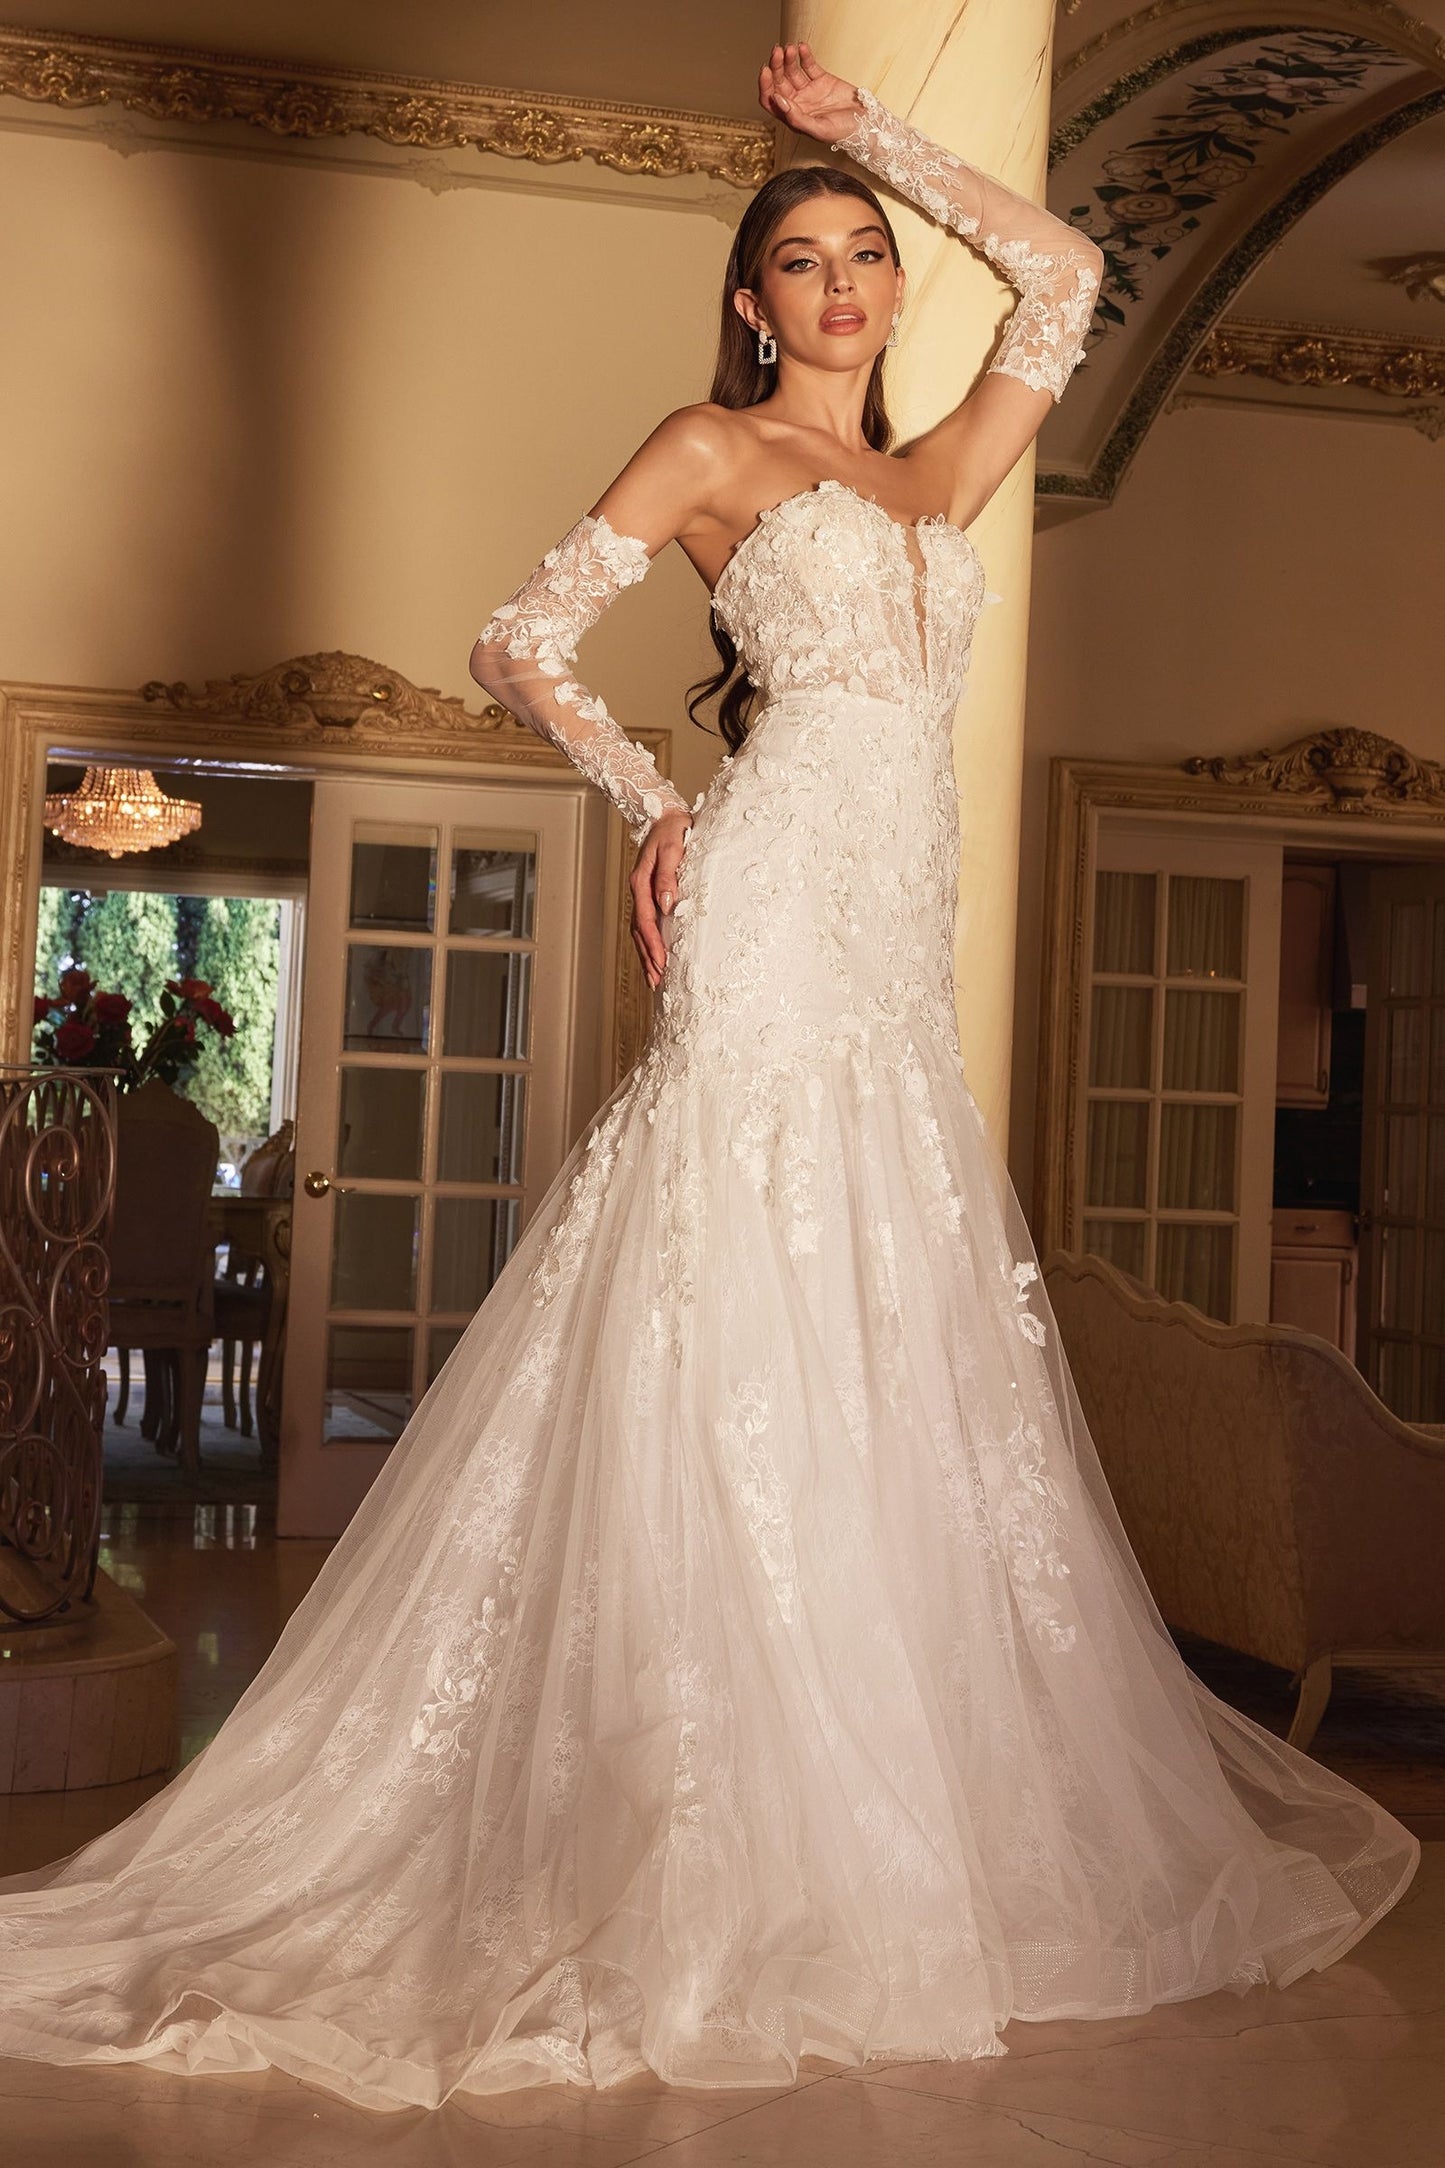 This Ladivine CD977W wedding dress features a beautiful chantilly lace design and three-dimensional floral appliques. The fit-and-flare silhouette includes a plunging v-neckline and lace-up corset back, with removable off-the-shoulder long lace sleeves and a detachable underarm for a customizable look. Perfect for making a lasting impression at your special event.